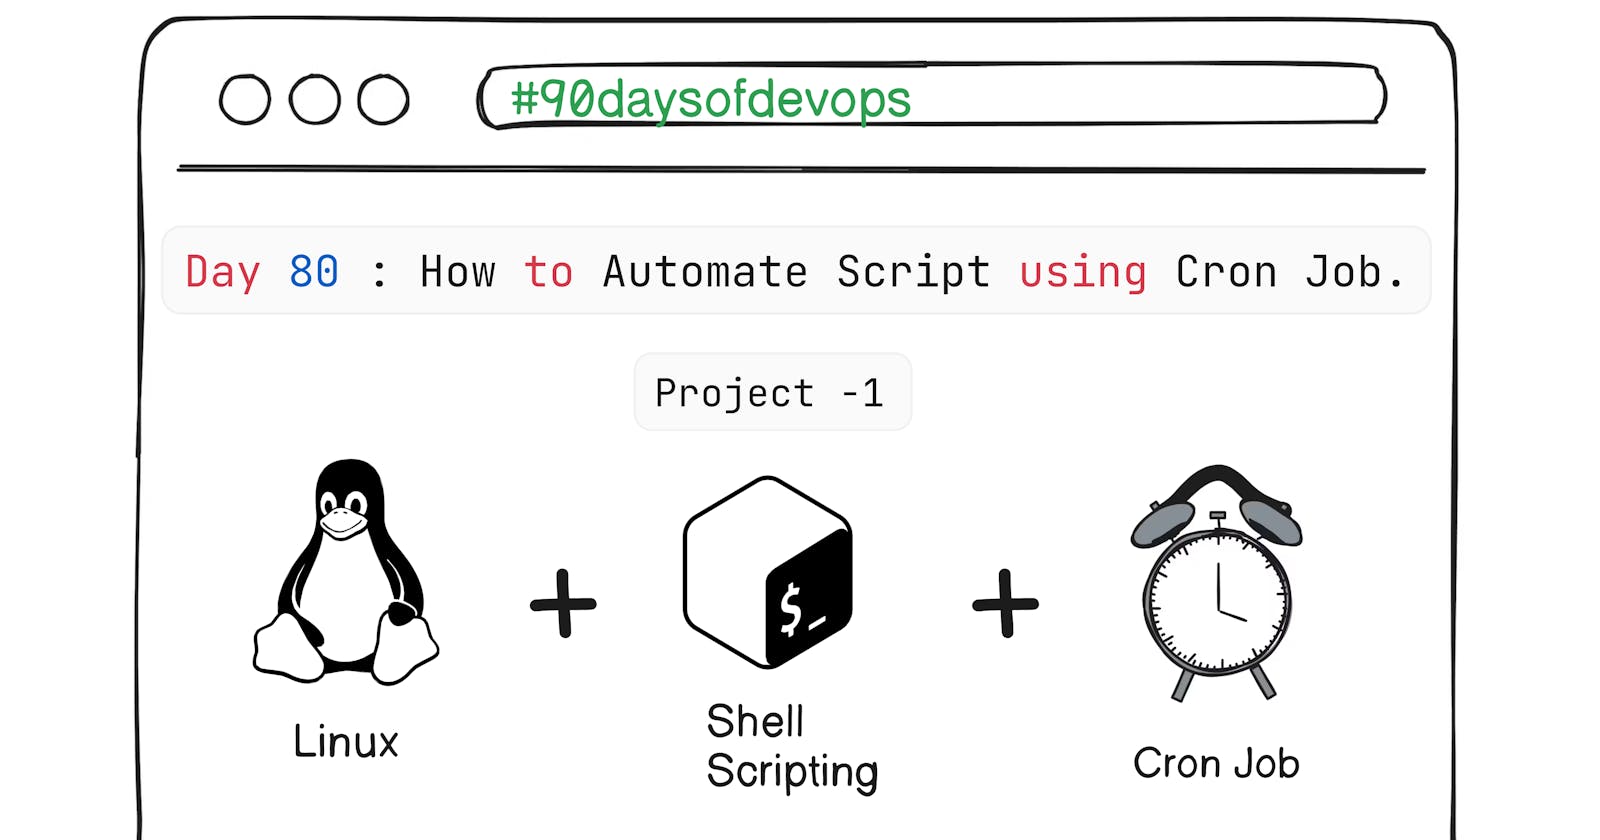 Day 80 : How to Automate Script using Cron Job.